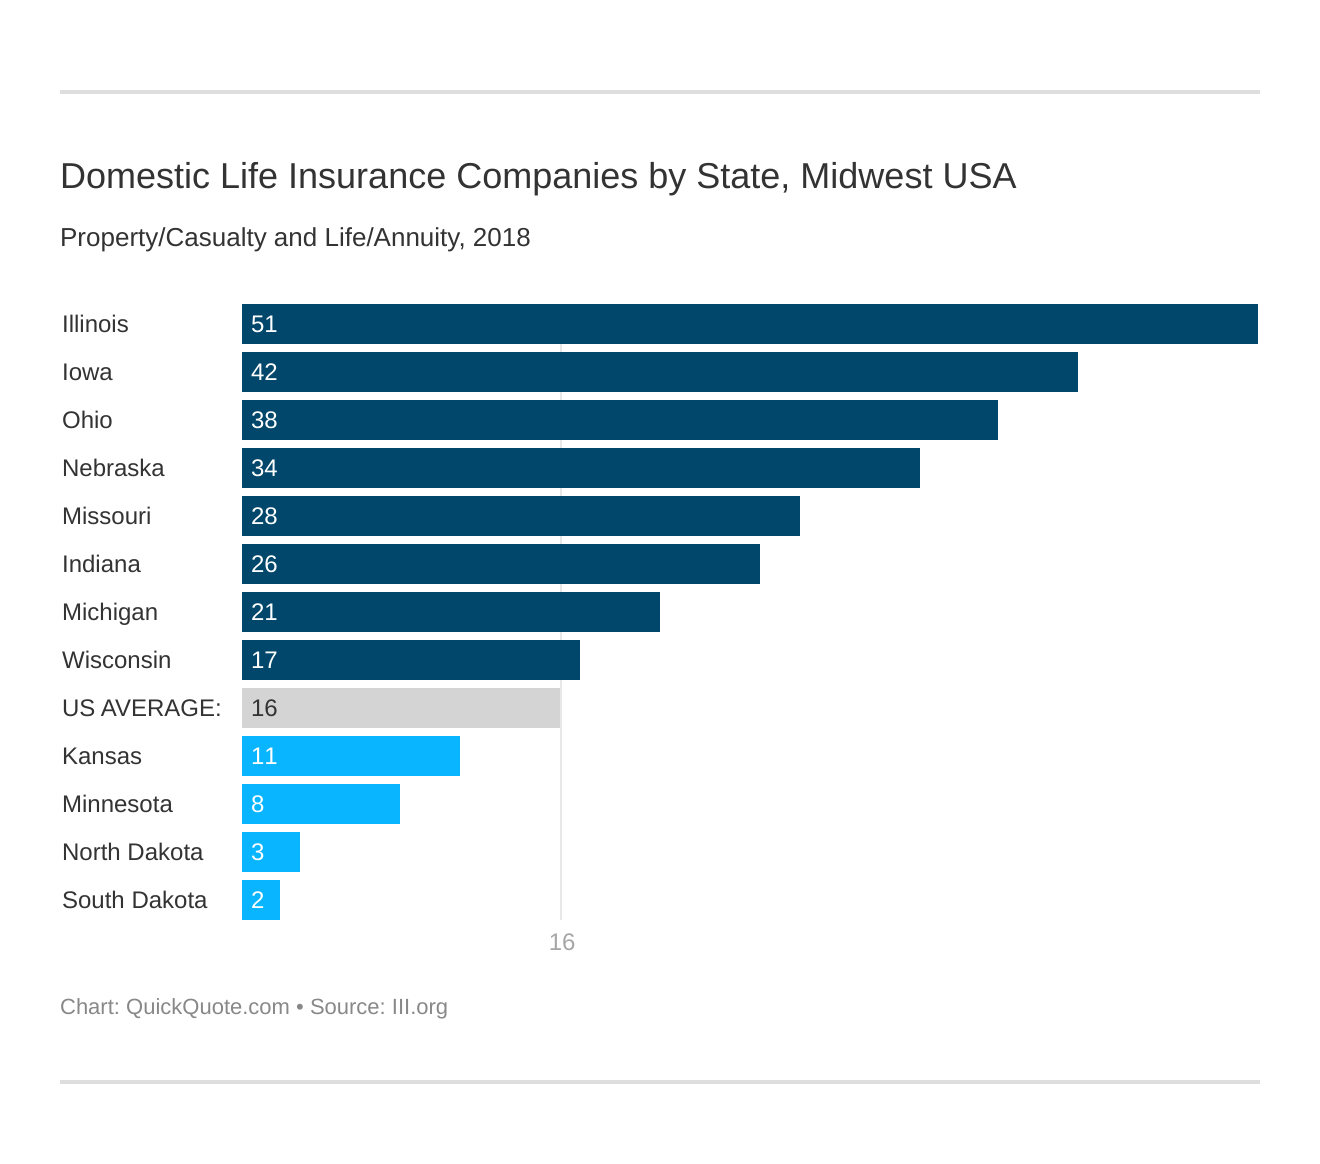 Domestic Life Insurance Companies by State, Midwest USA